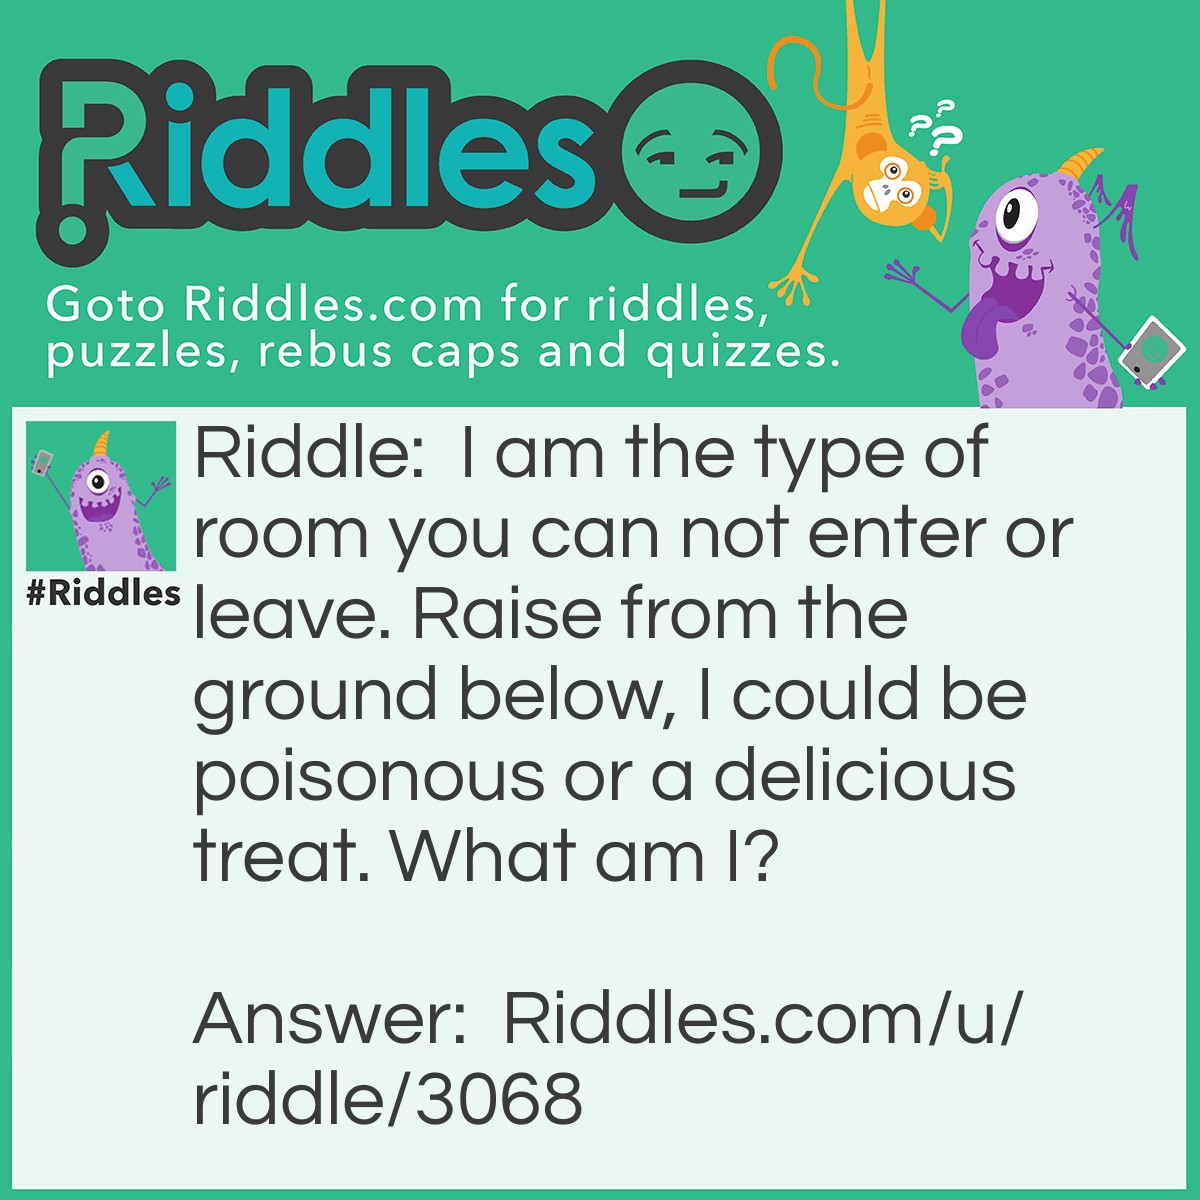 Riddle: I am the type of room you can not enter or leave. Raise from the ground below, I could be poisonous or a delicious treat. What am I? Answer: A Mushroom.